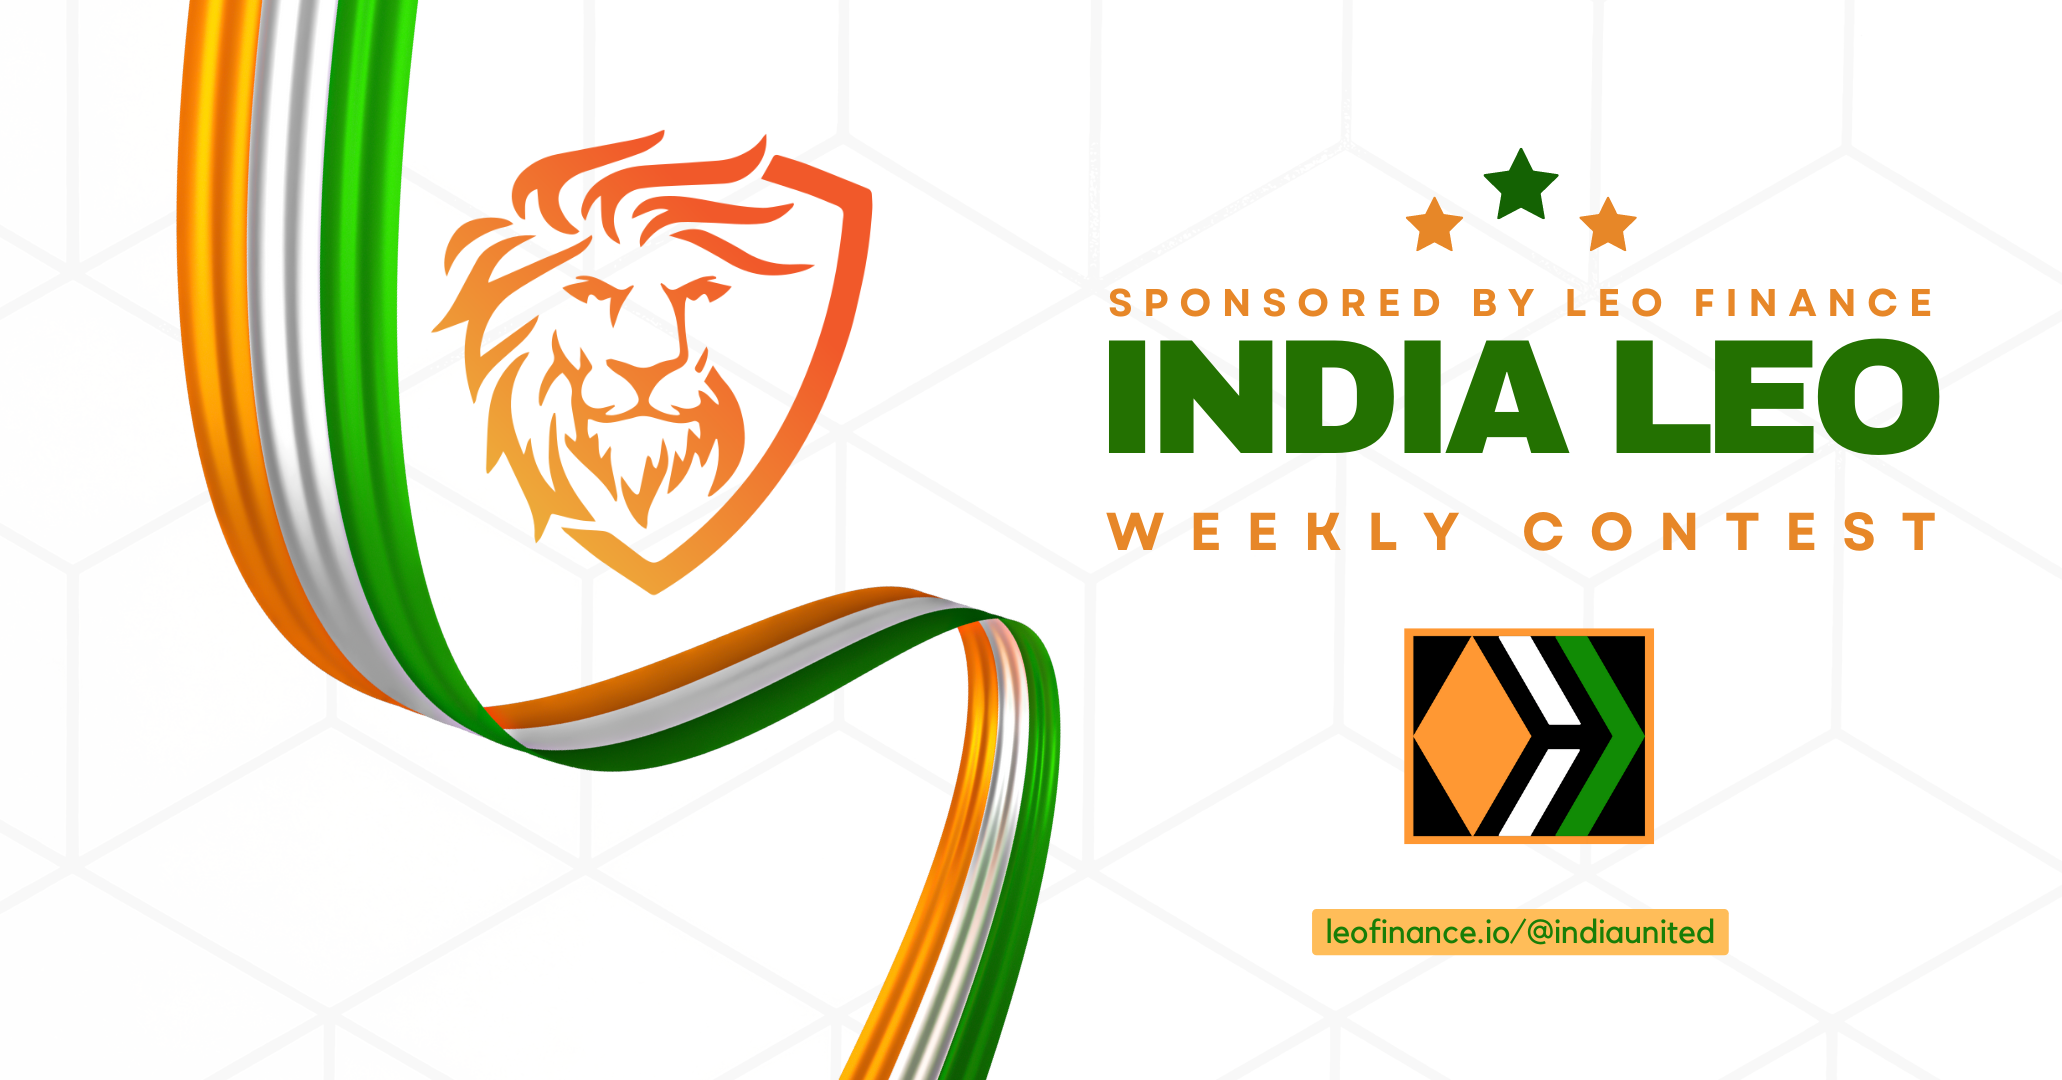 @indiaunited/india-leo-weekly-contest-announcing-winners-and-this-week-s-topic-5tjsrx